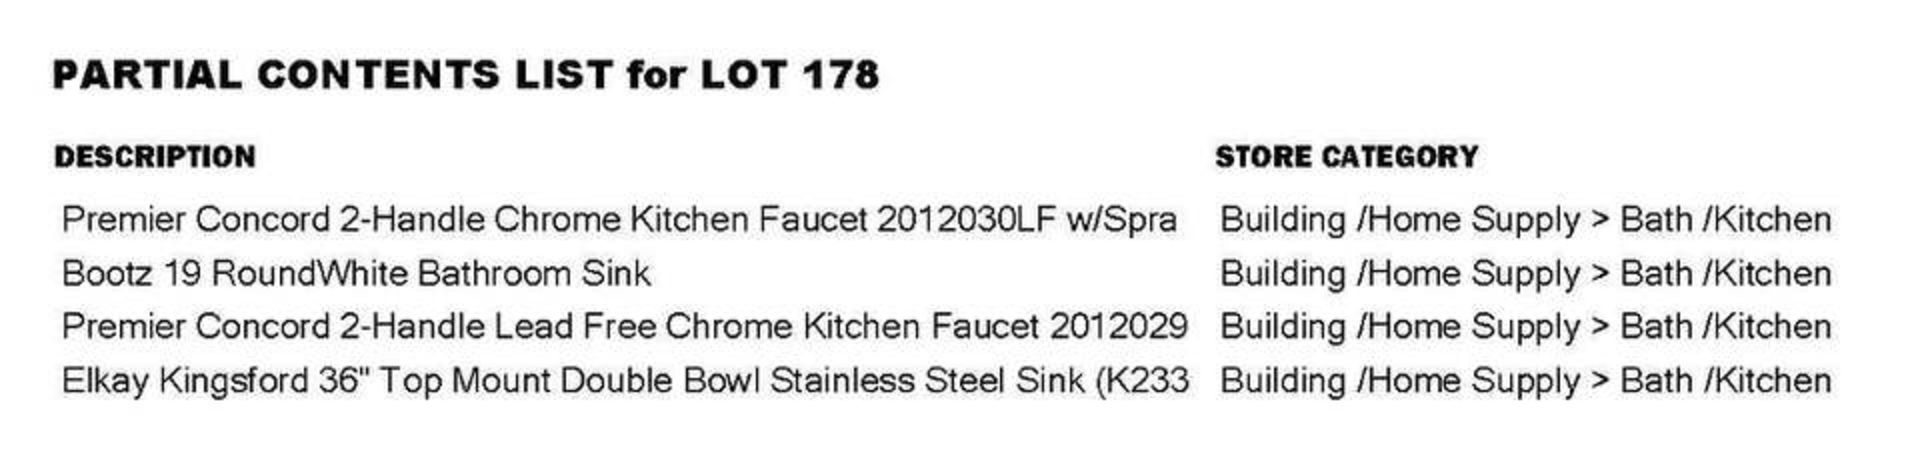 LOT of Premier Kitchen Faucets, Bootz Round White Bath Sink, Kingsford Double Stainless Steel Sink - Image 2 of 2